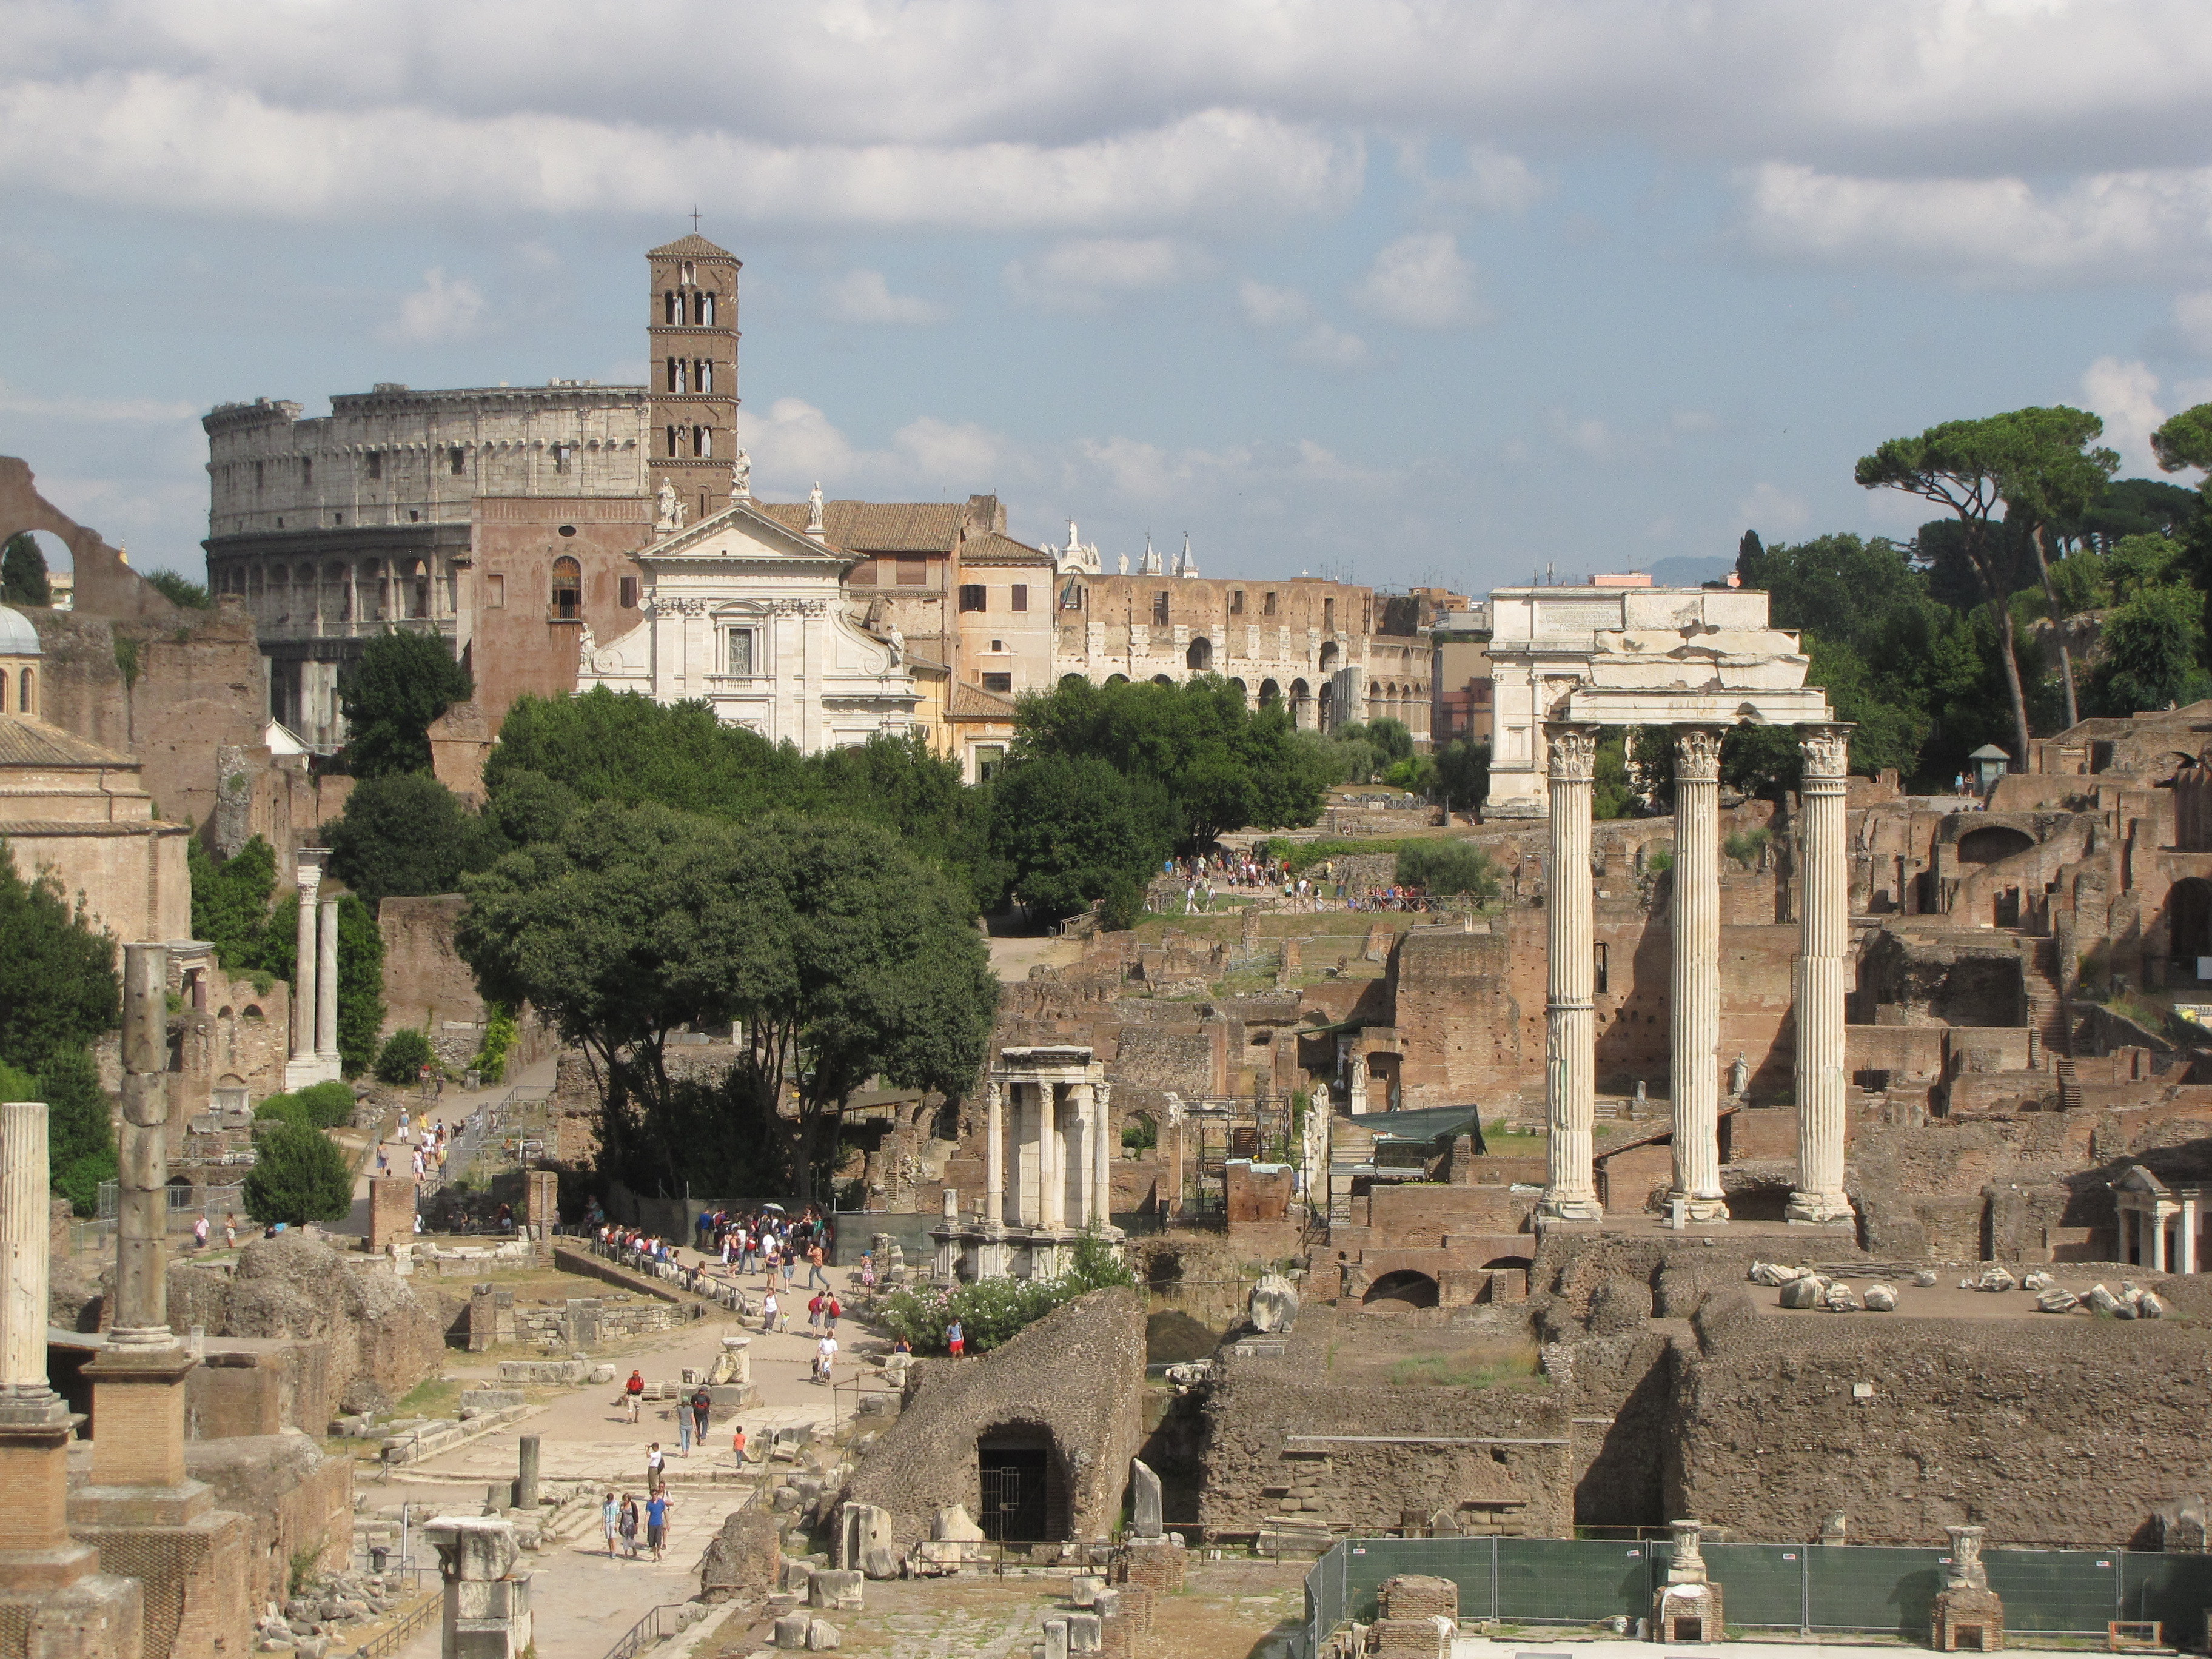 Roman ruins in Rome, Italy. JIM BYERS PHOTO